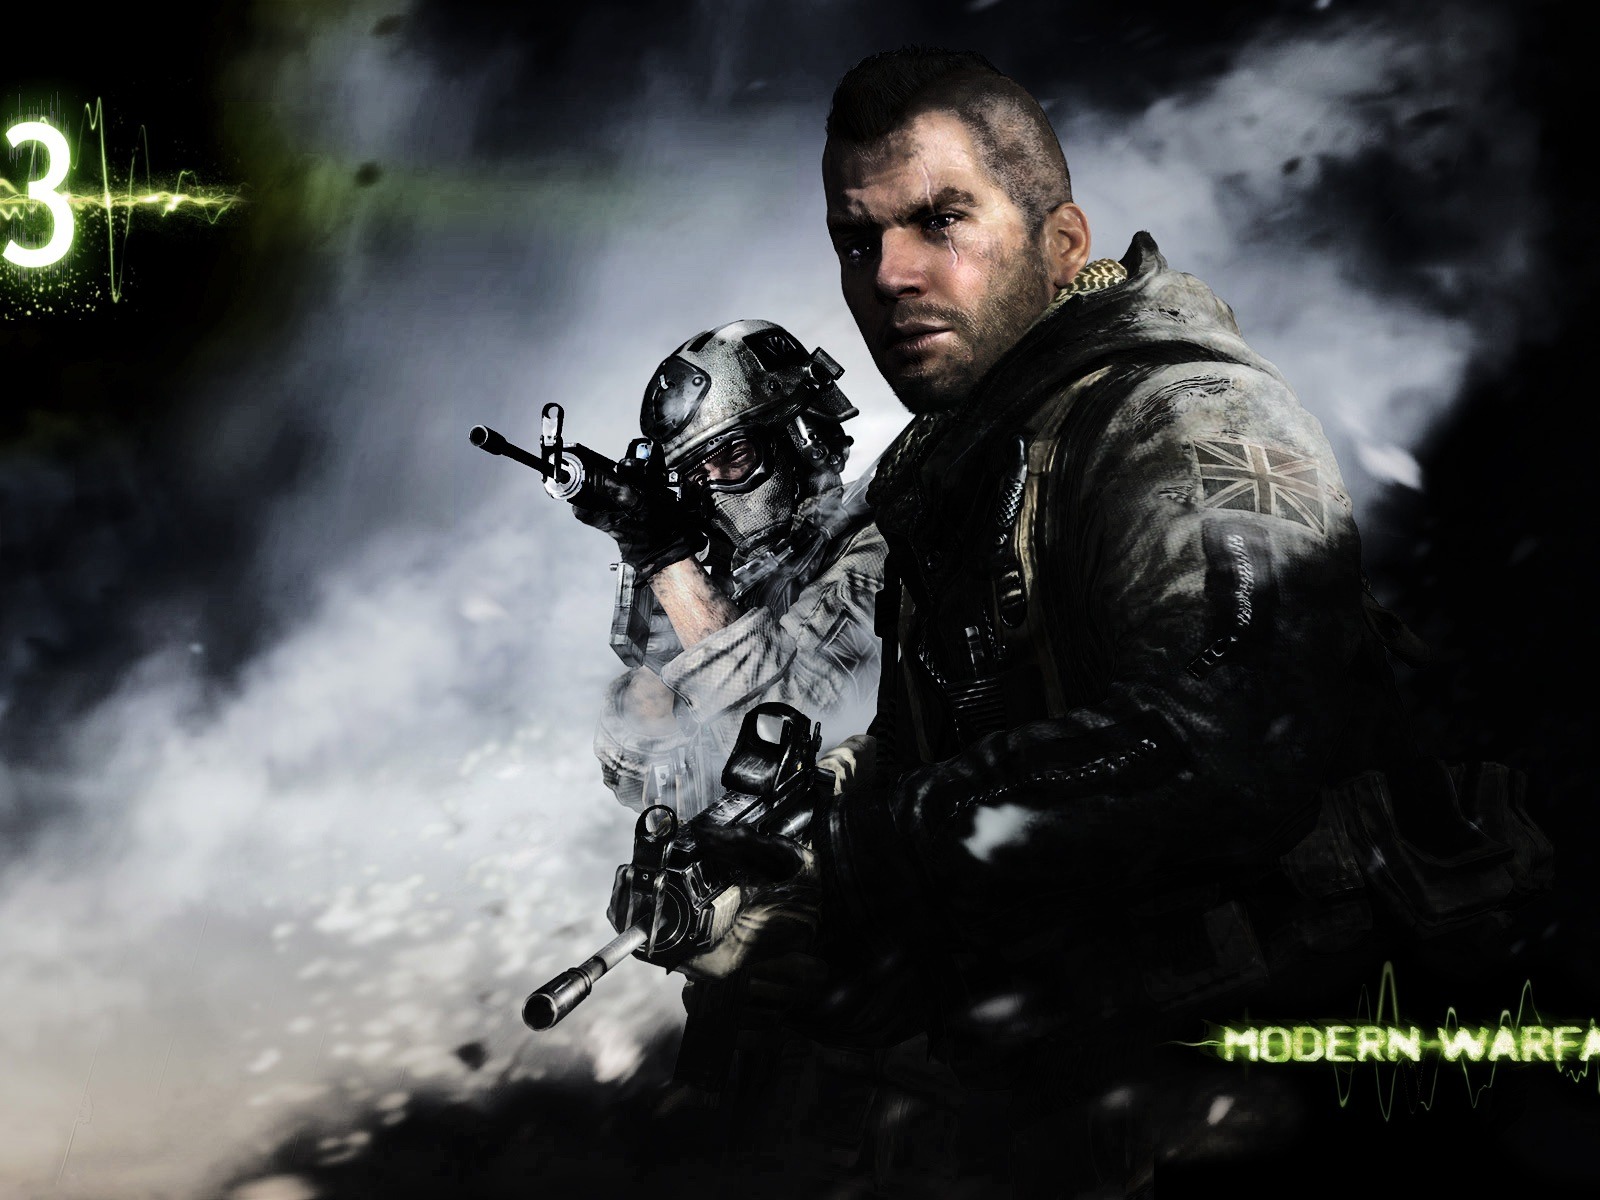 Call of Duty: MW3 HD wallpapers #13 - 1600x1200